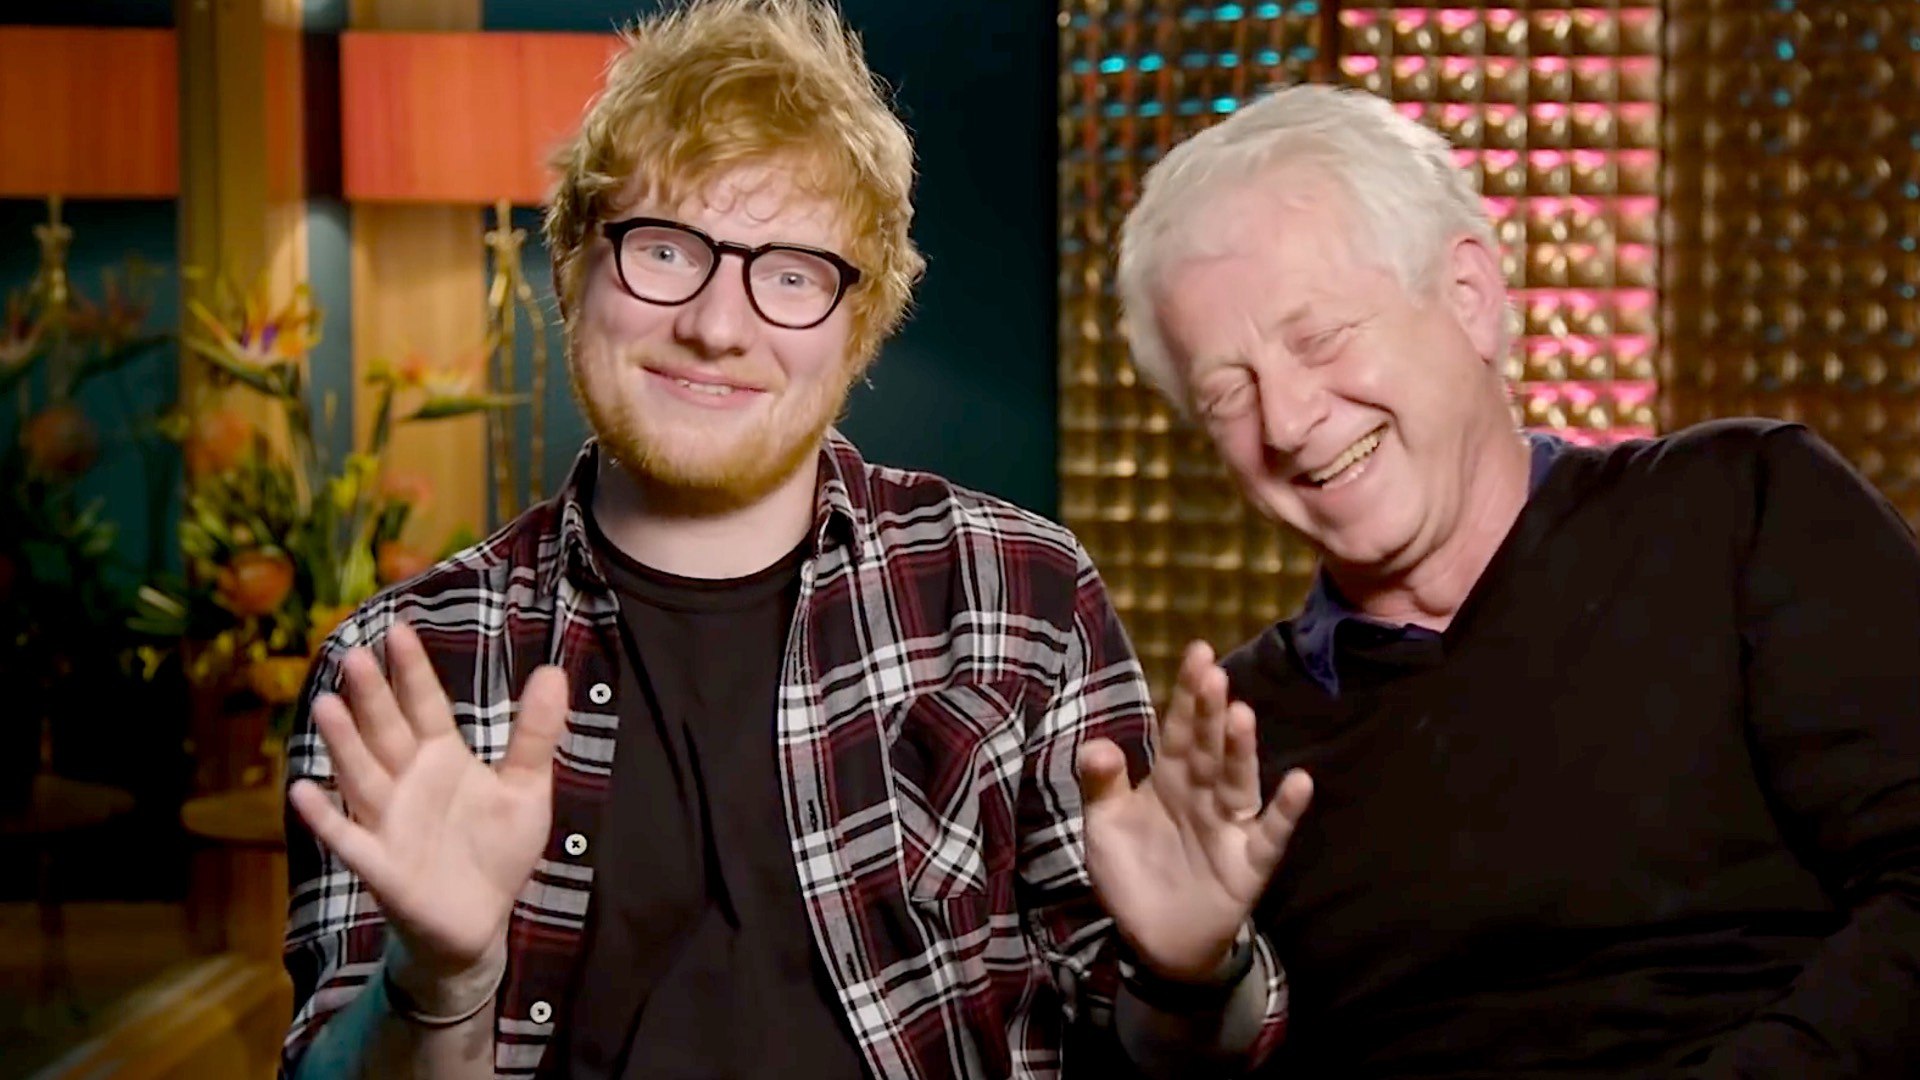 Yesterday - Behind the Scenes with Ed Sheeran